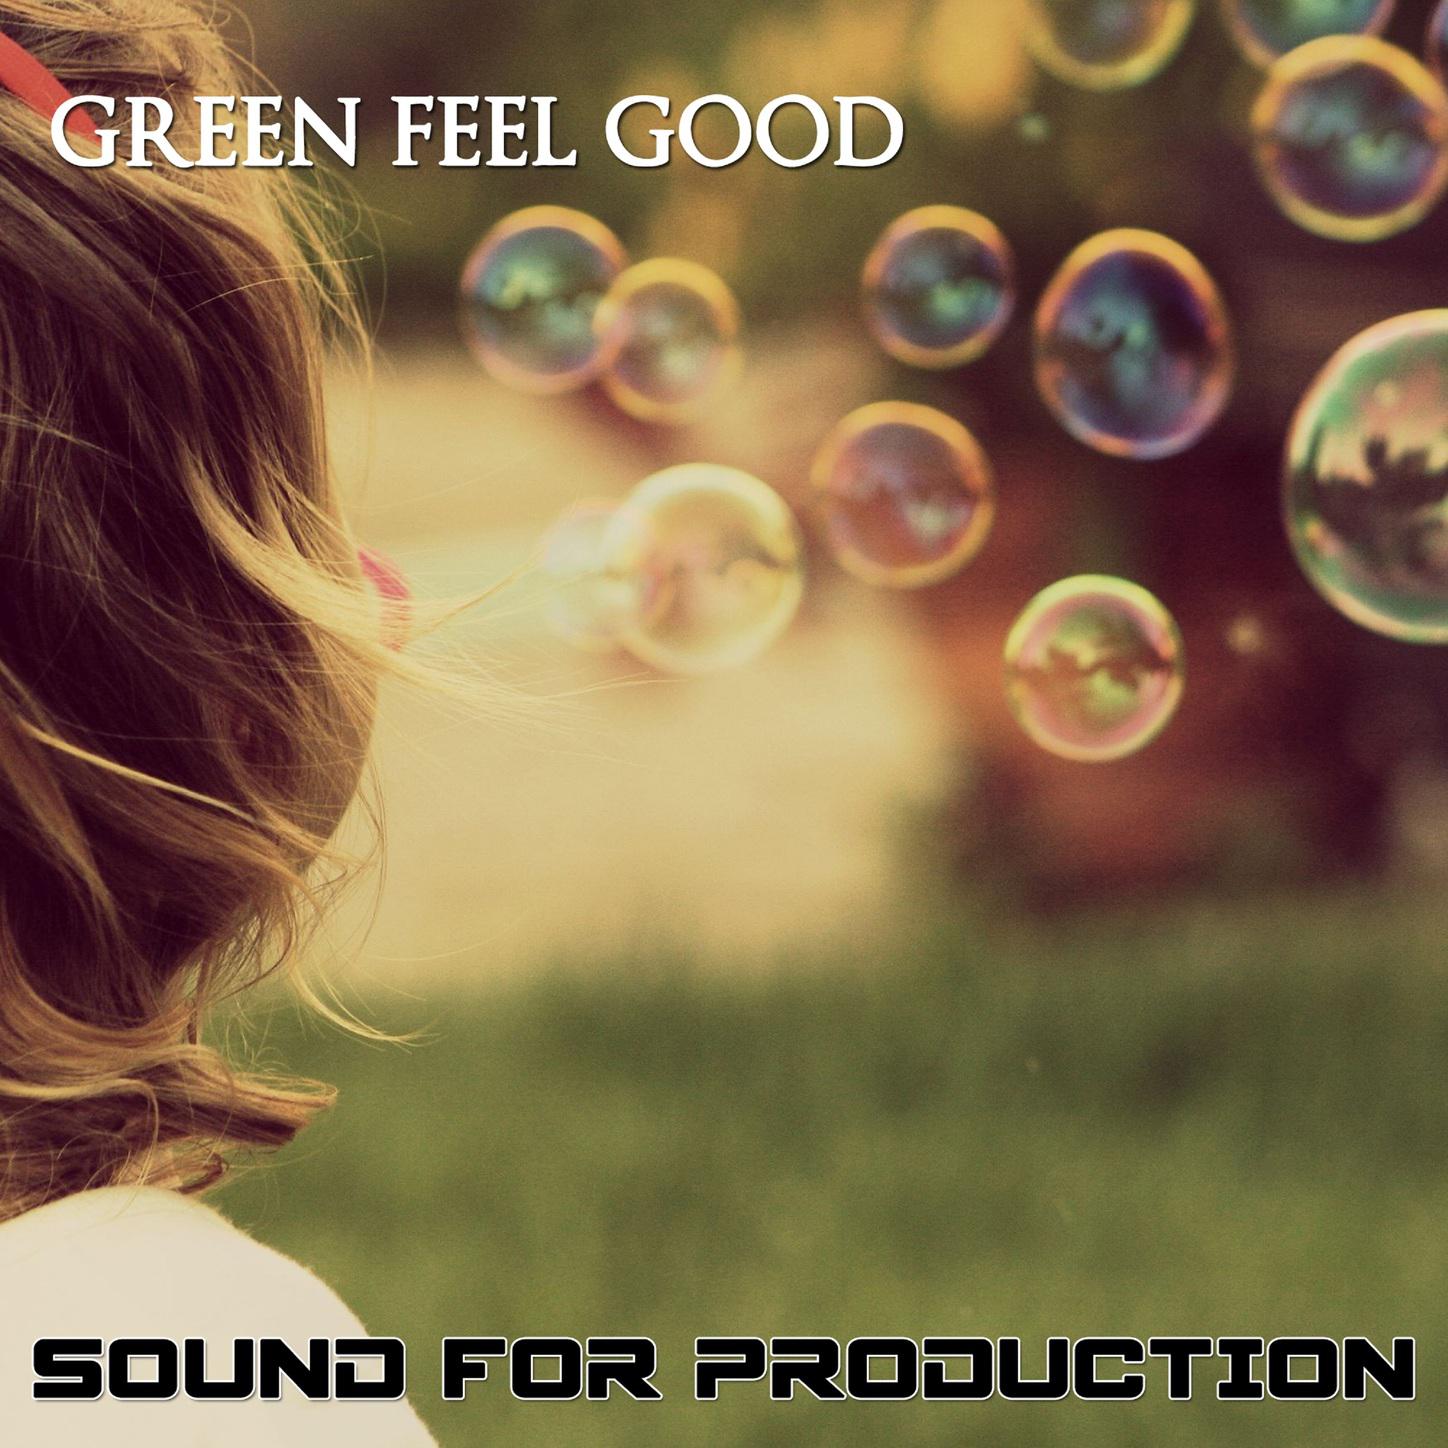 Sound For Production Green Feel Good